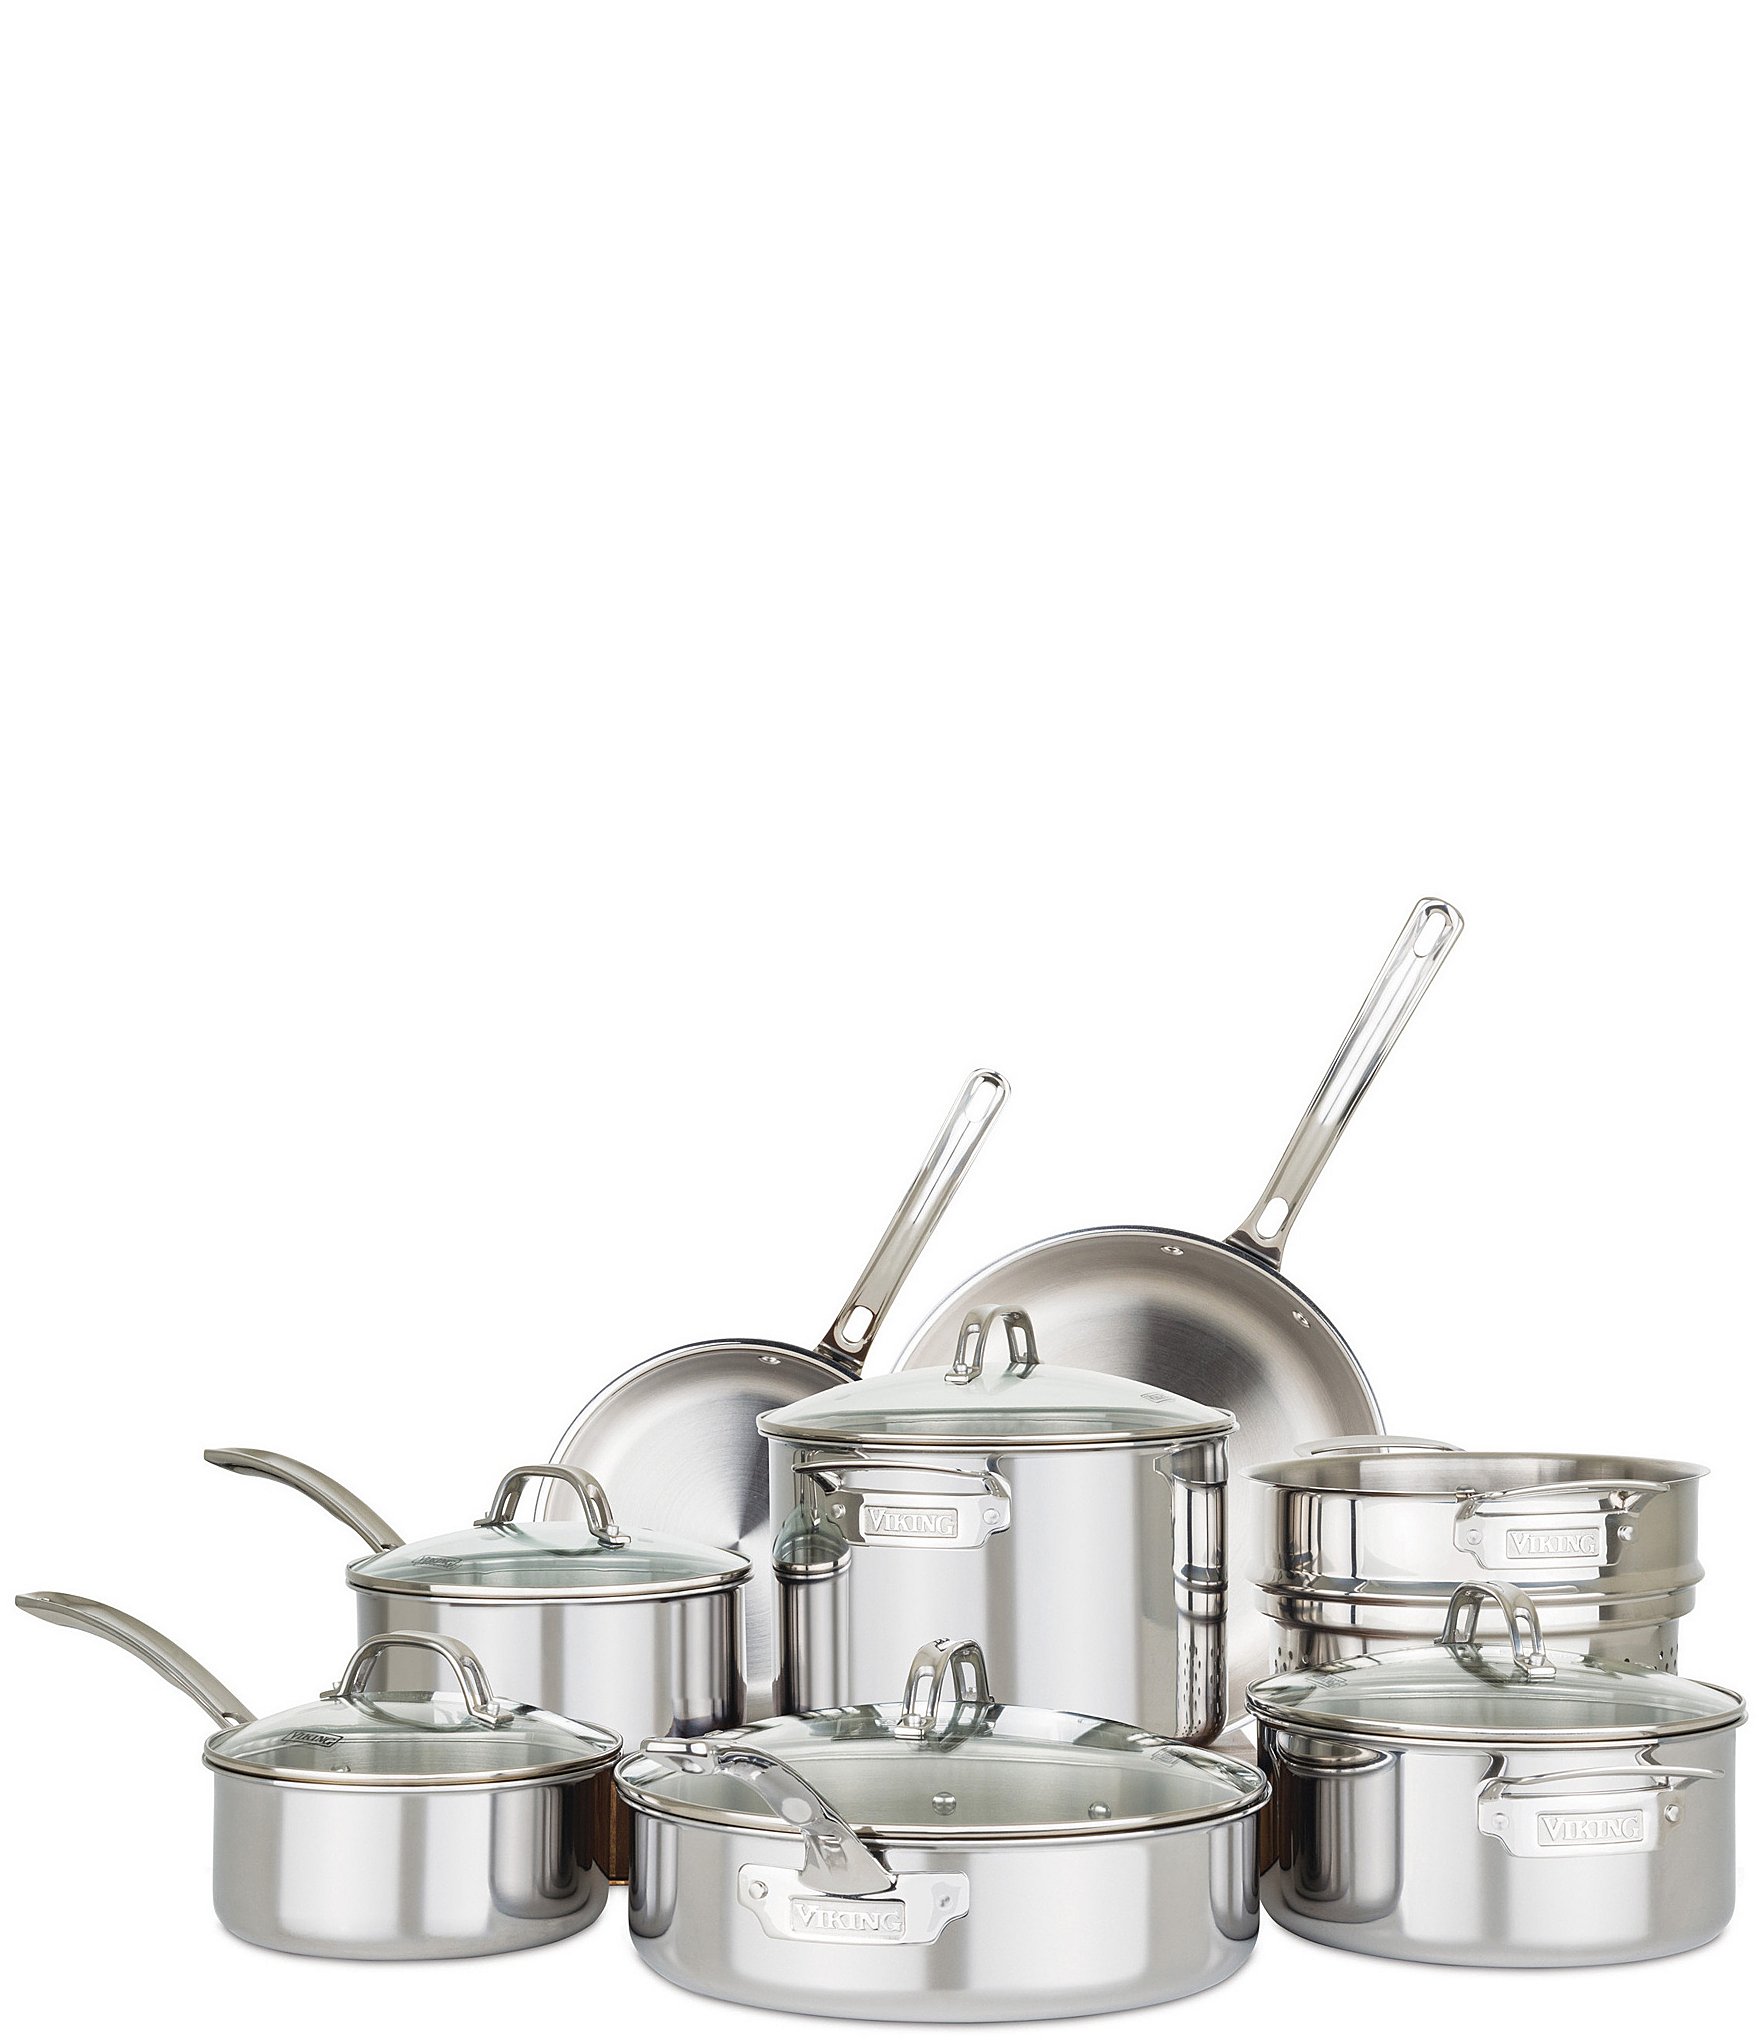 https://dimg.dillards.com/is/image/DillardsZoom/zoom/viking-3-ply-stainless-steel-13-piece-cookware-set-with-glass-lids/00000000_zi_20427843.jpg